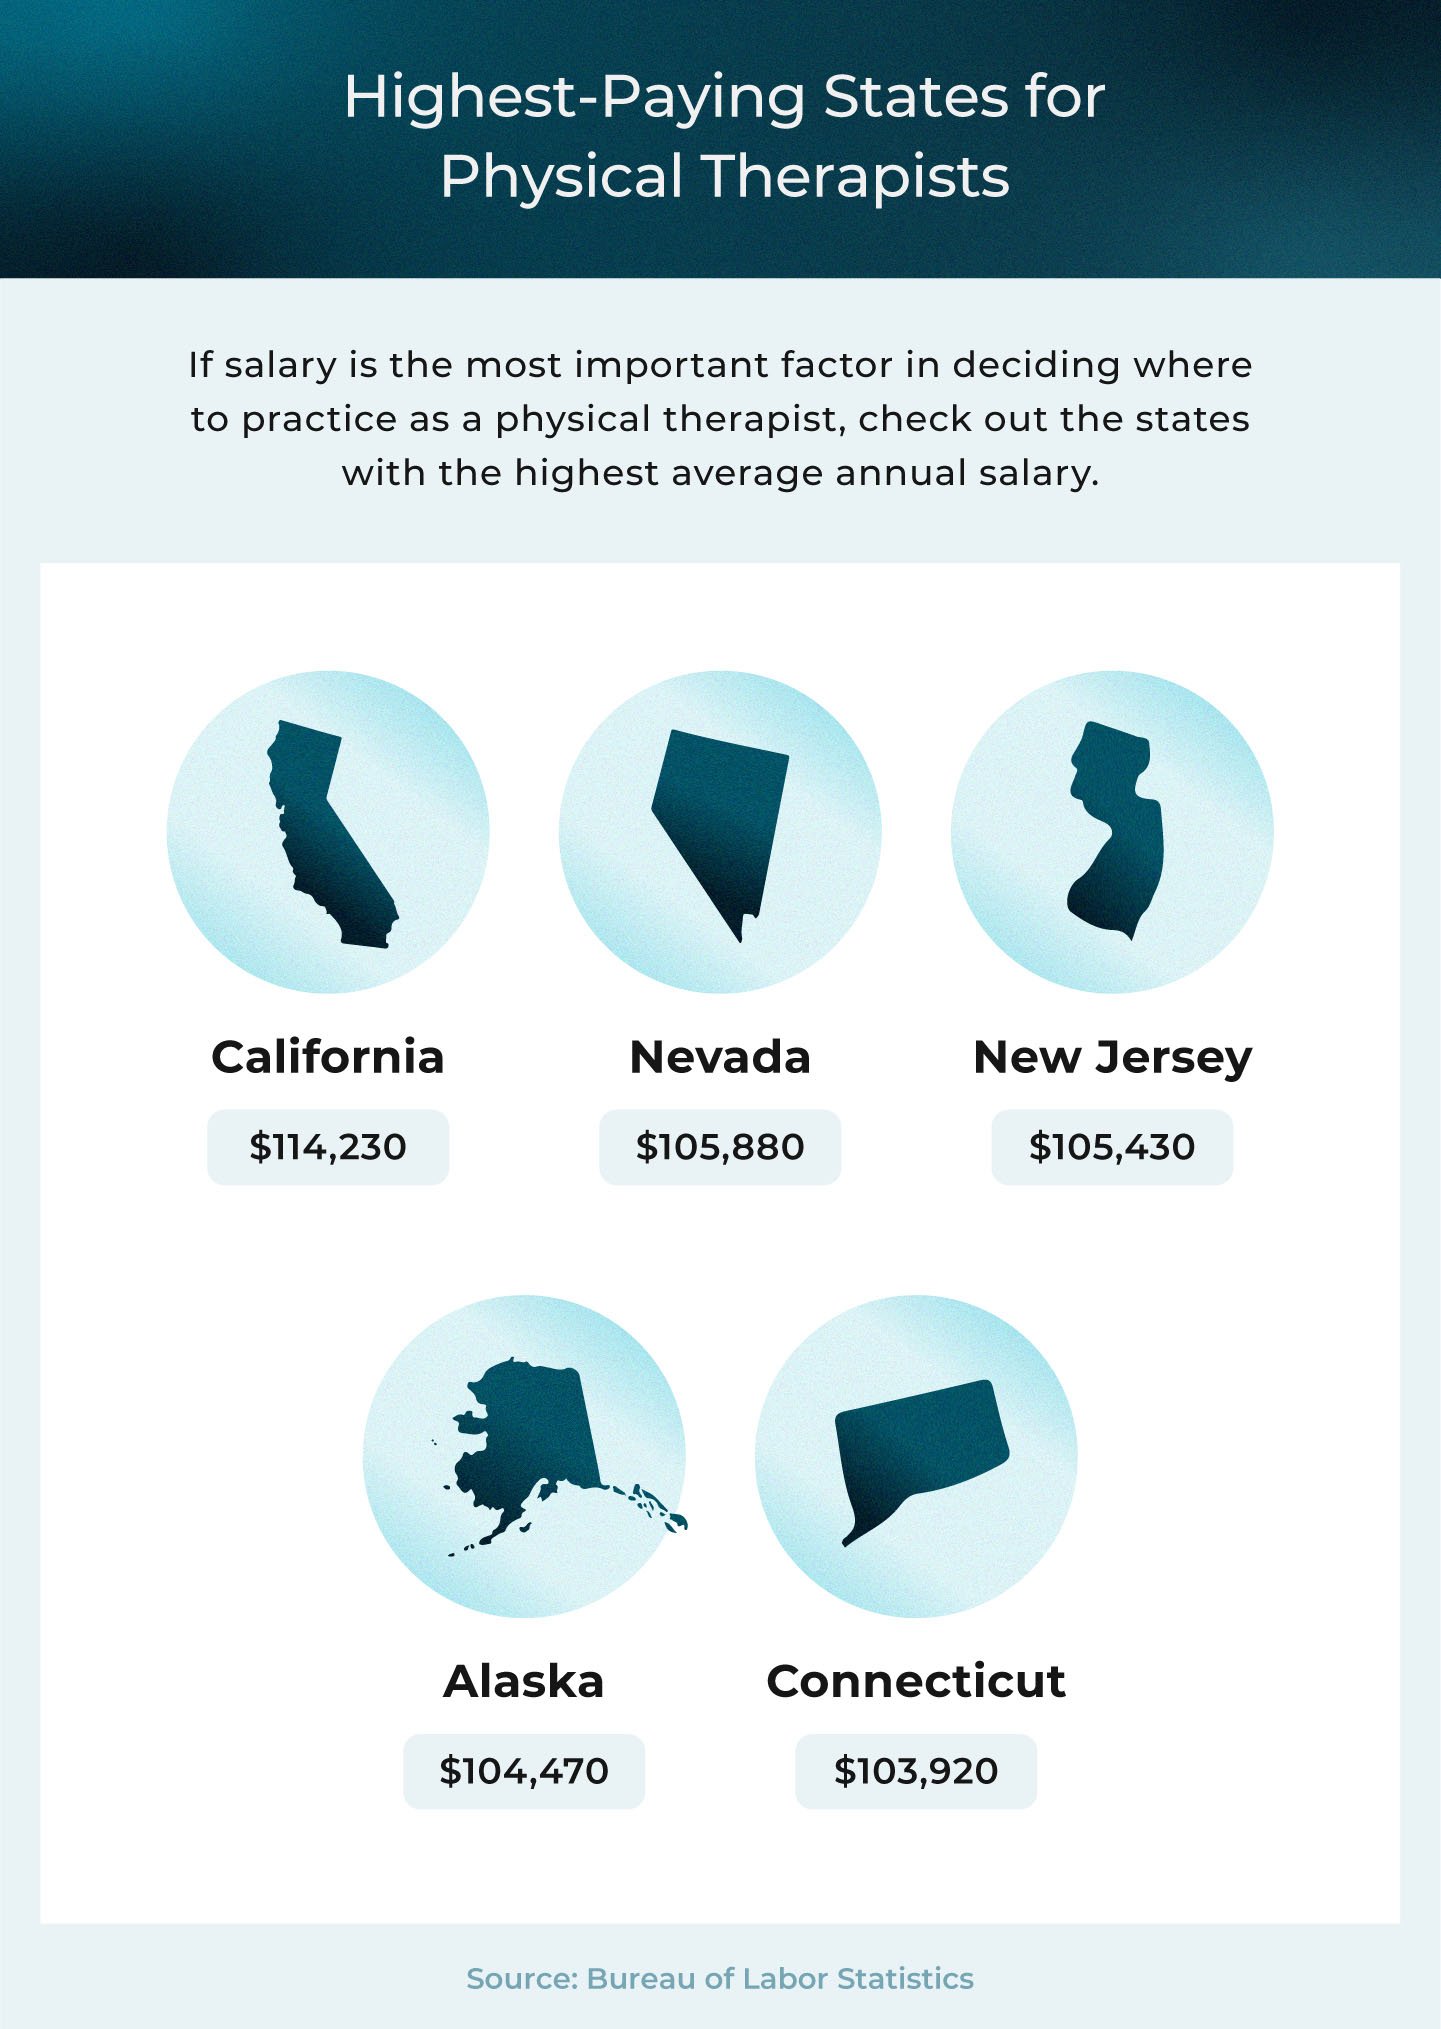 The highest-paying states for physical therapists based on average annual salary data.